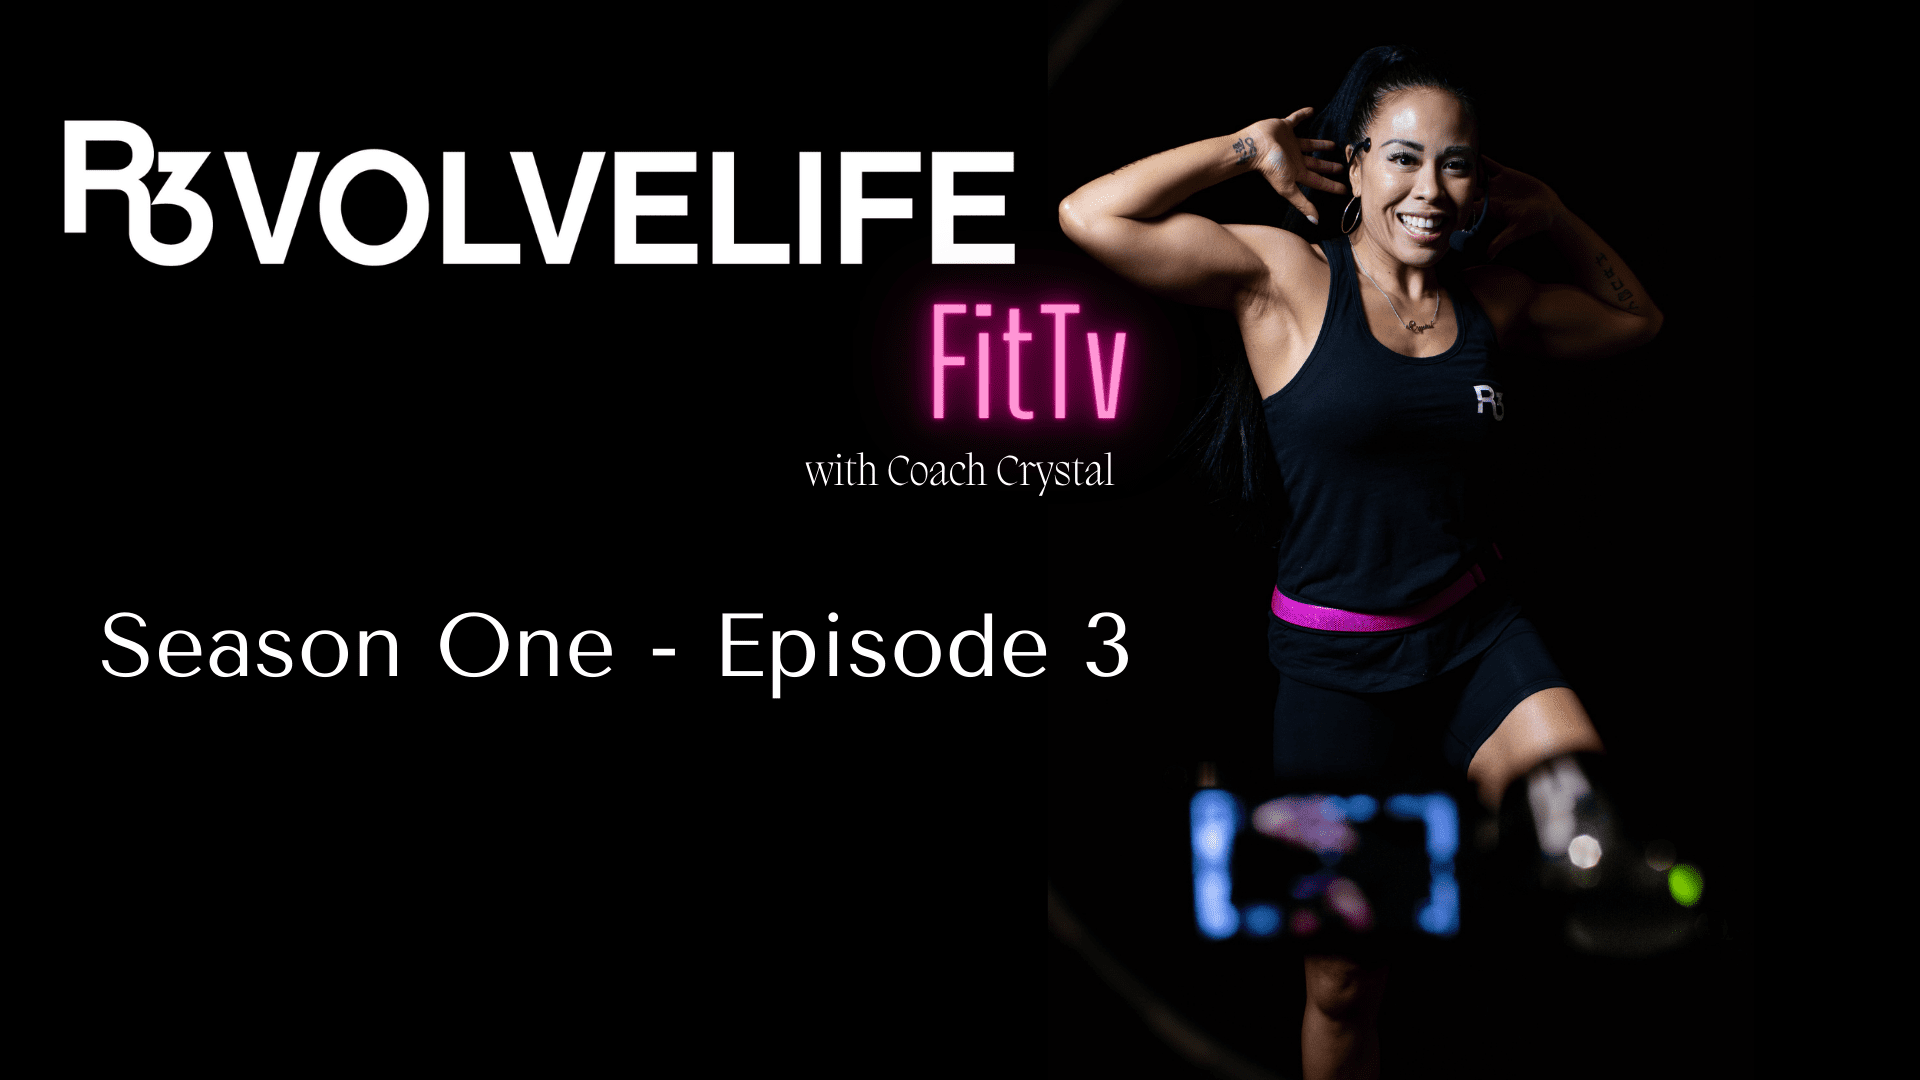 R3VOLVELIFE FIT TV with Coach Crystal – Episode 3